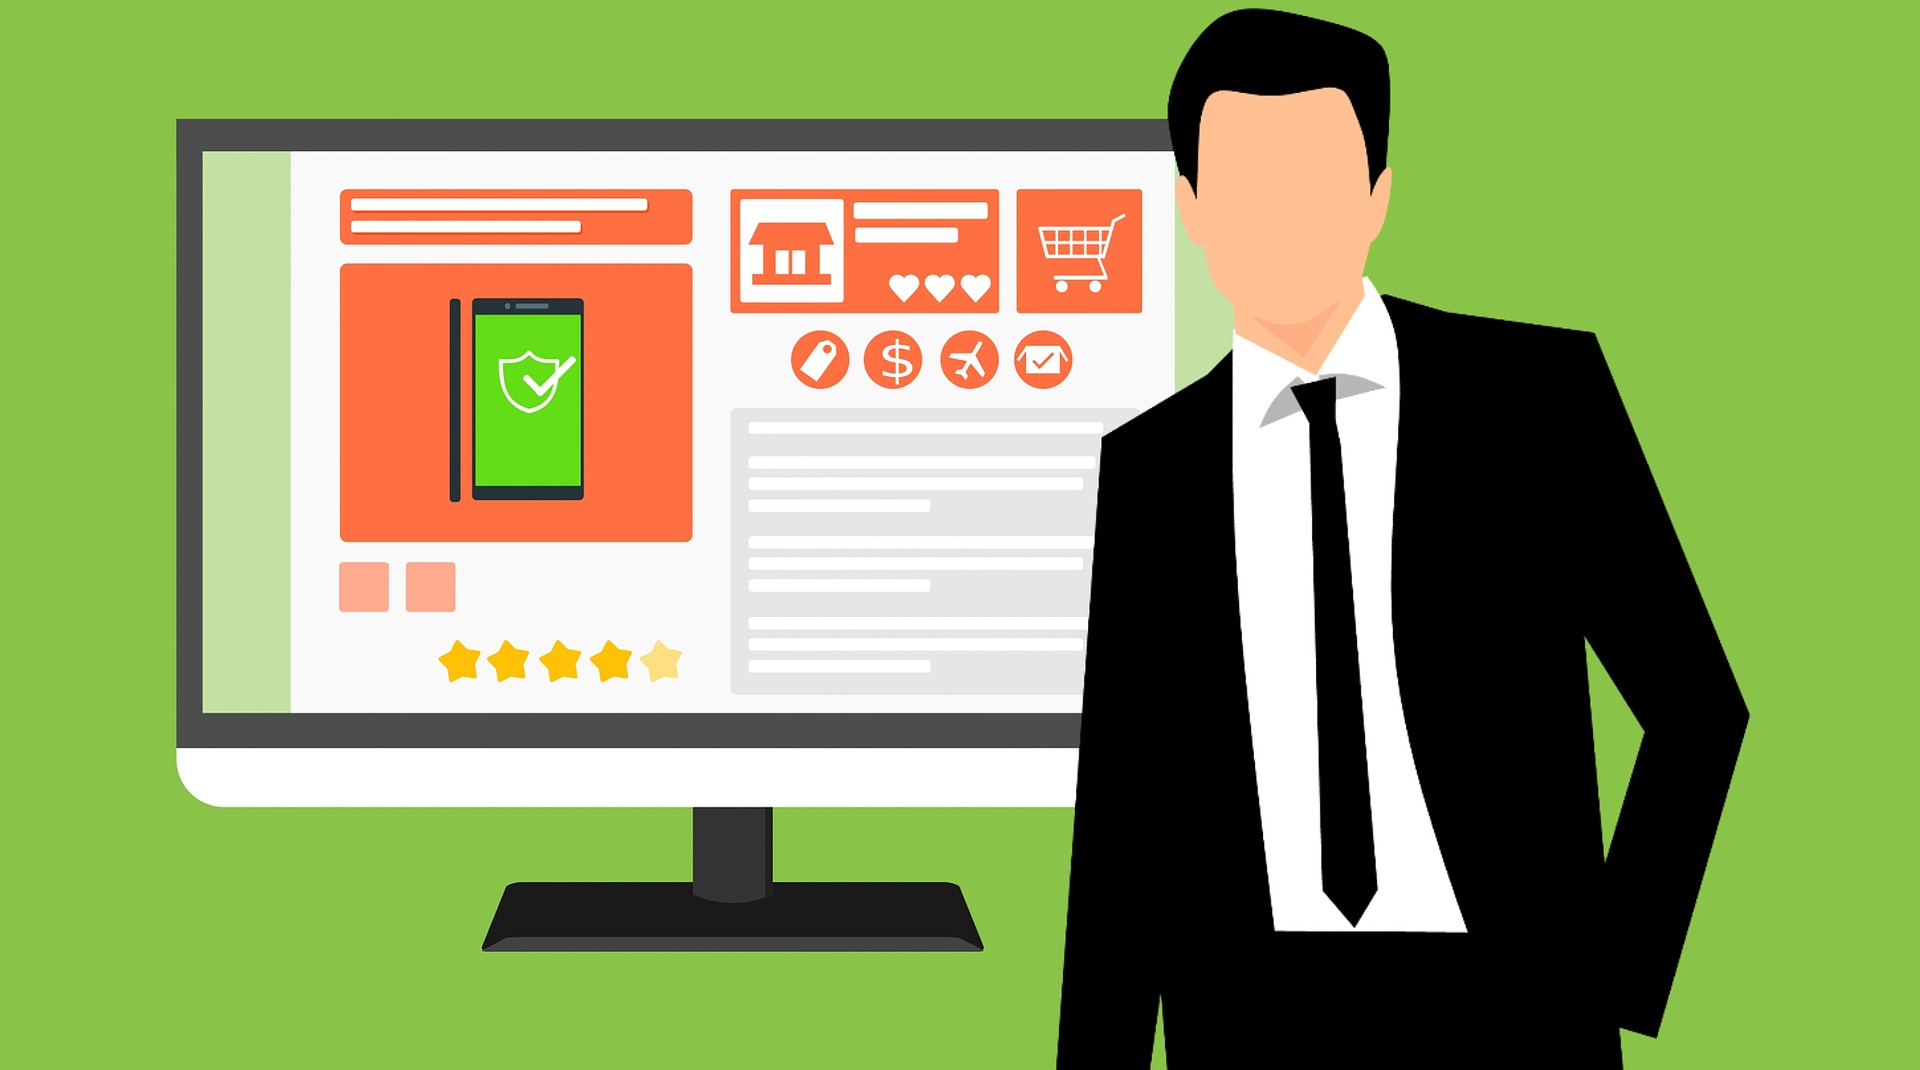 Creating an Ecommerce Website